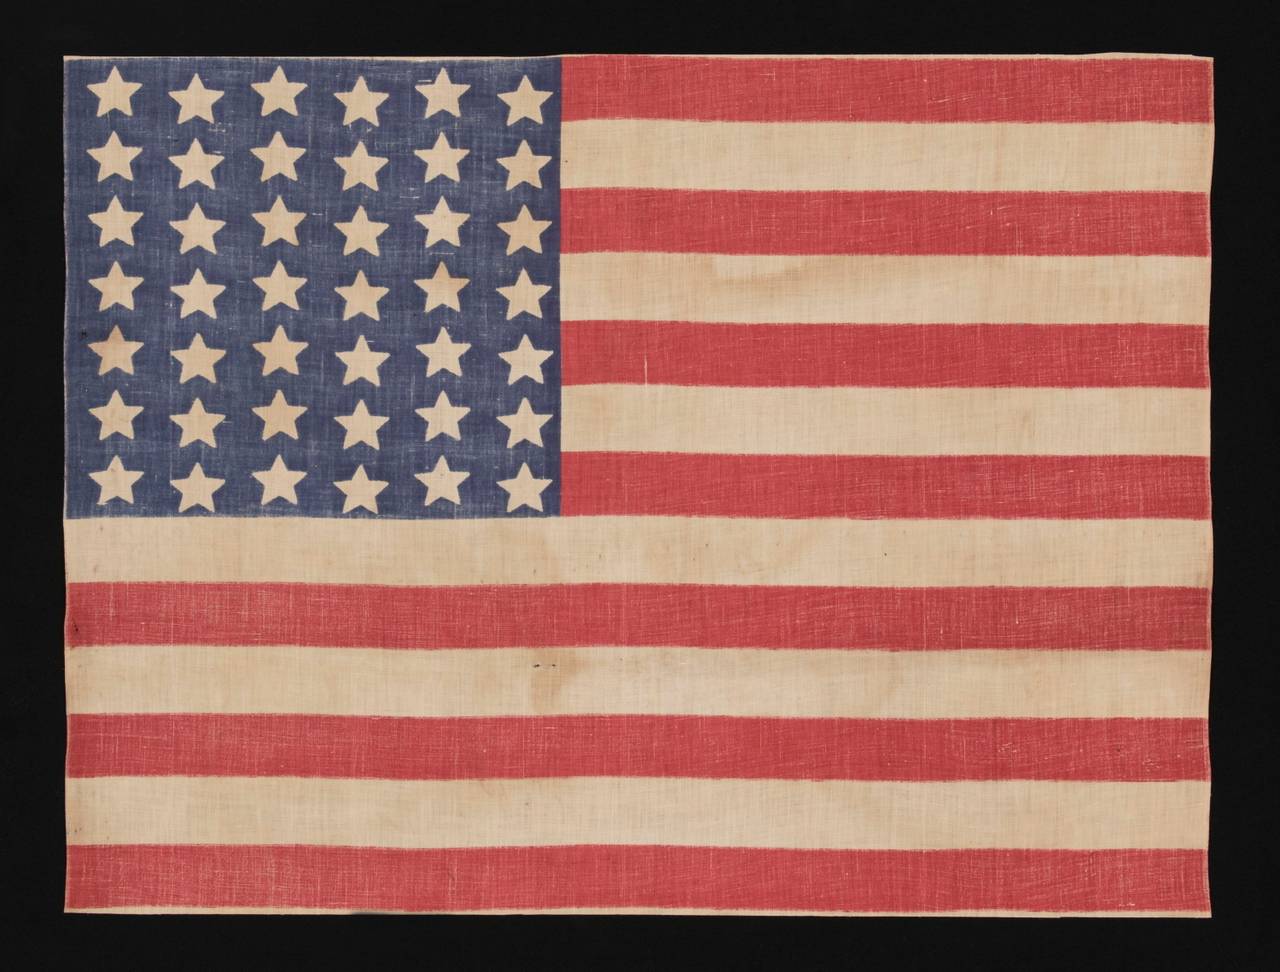 42 STARS IN A WAVE CONFIGURATION OF LINEAL COLUMNS, NEVER AN OFFICIAL STAR COUNT, 1889-1890, WASHINGTON STATEHOOD:

 42 star American parade flag, printed on cotton. This interesting star pattern is called a “wave” configuration. Note how the